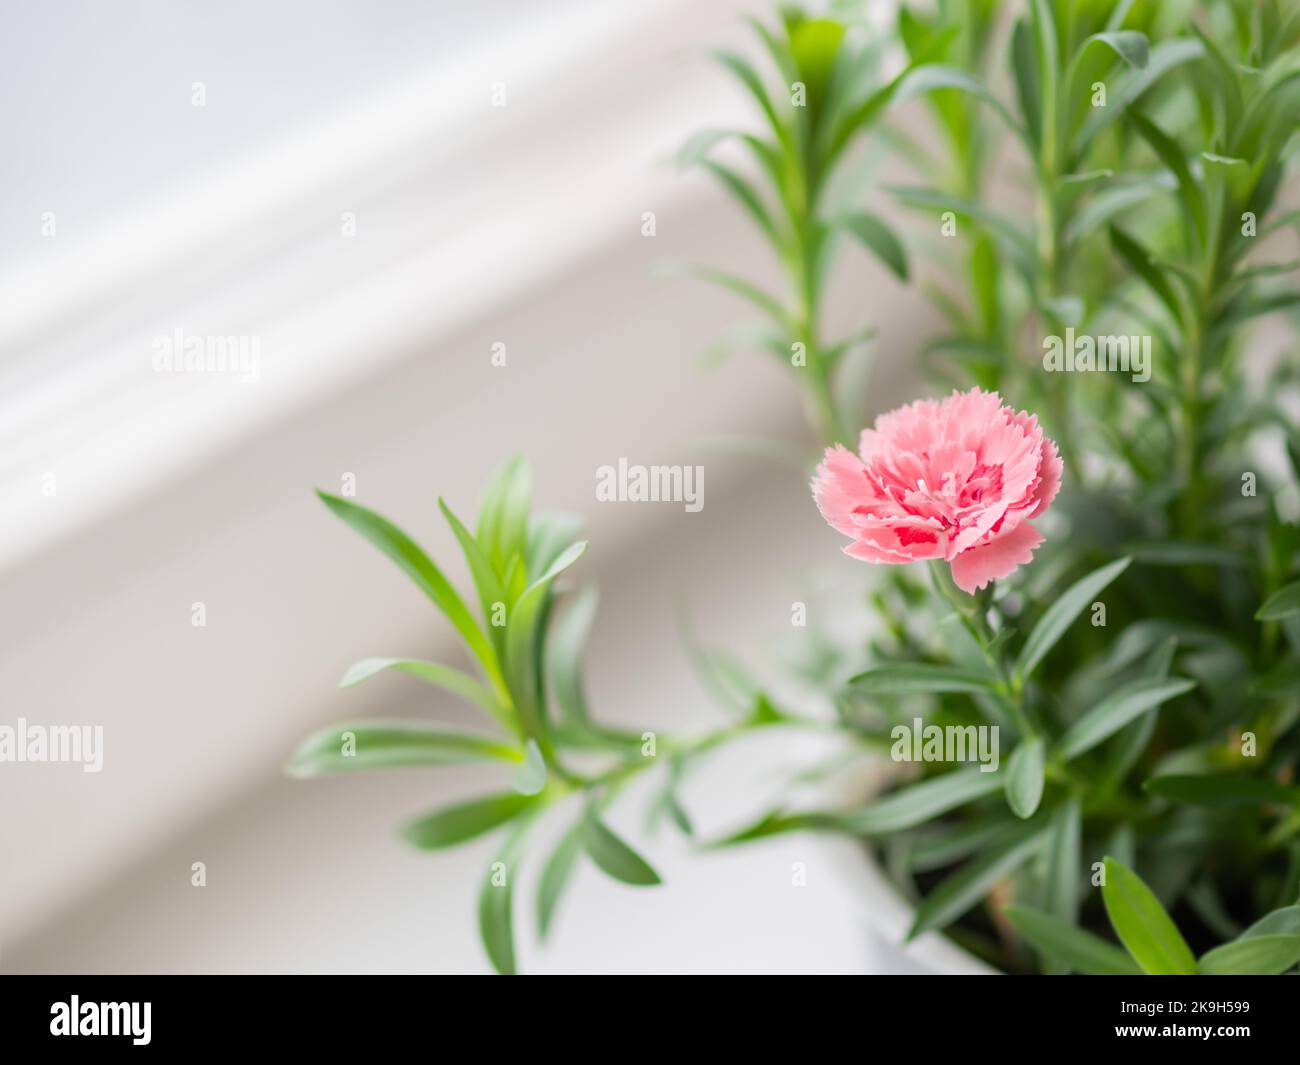 Pink flower of Dianthus chinensis, commonly known as rainbow pink or China pink. Blooming house plant on window sill. Stock Photo